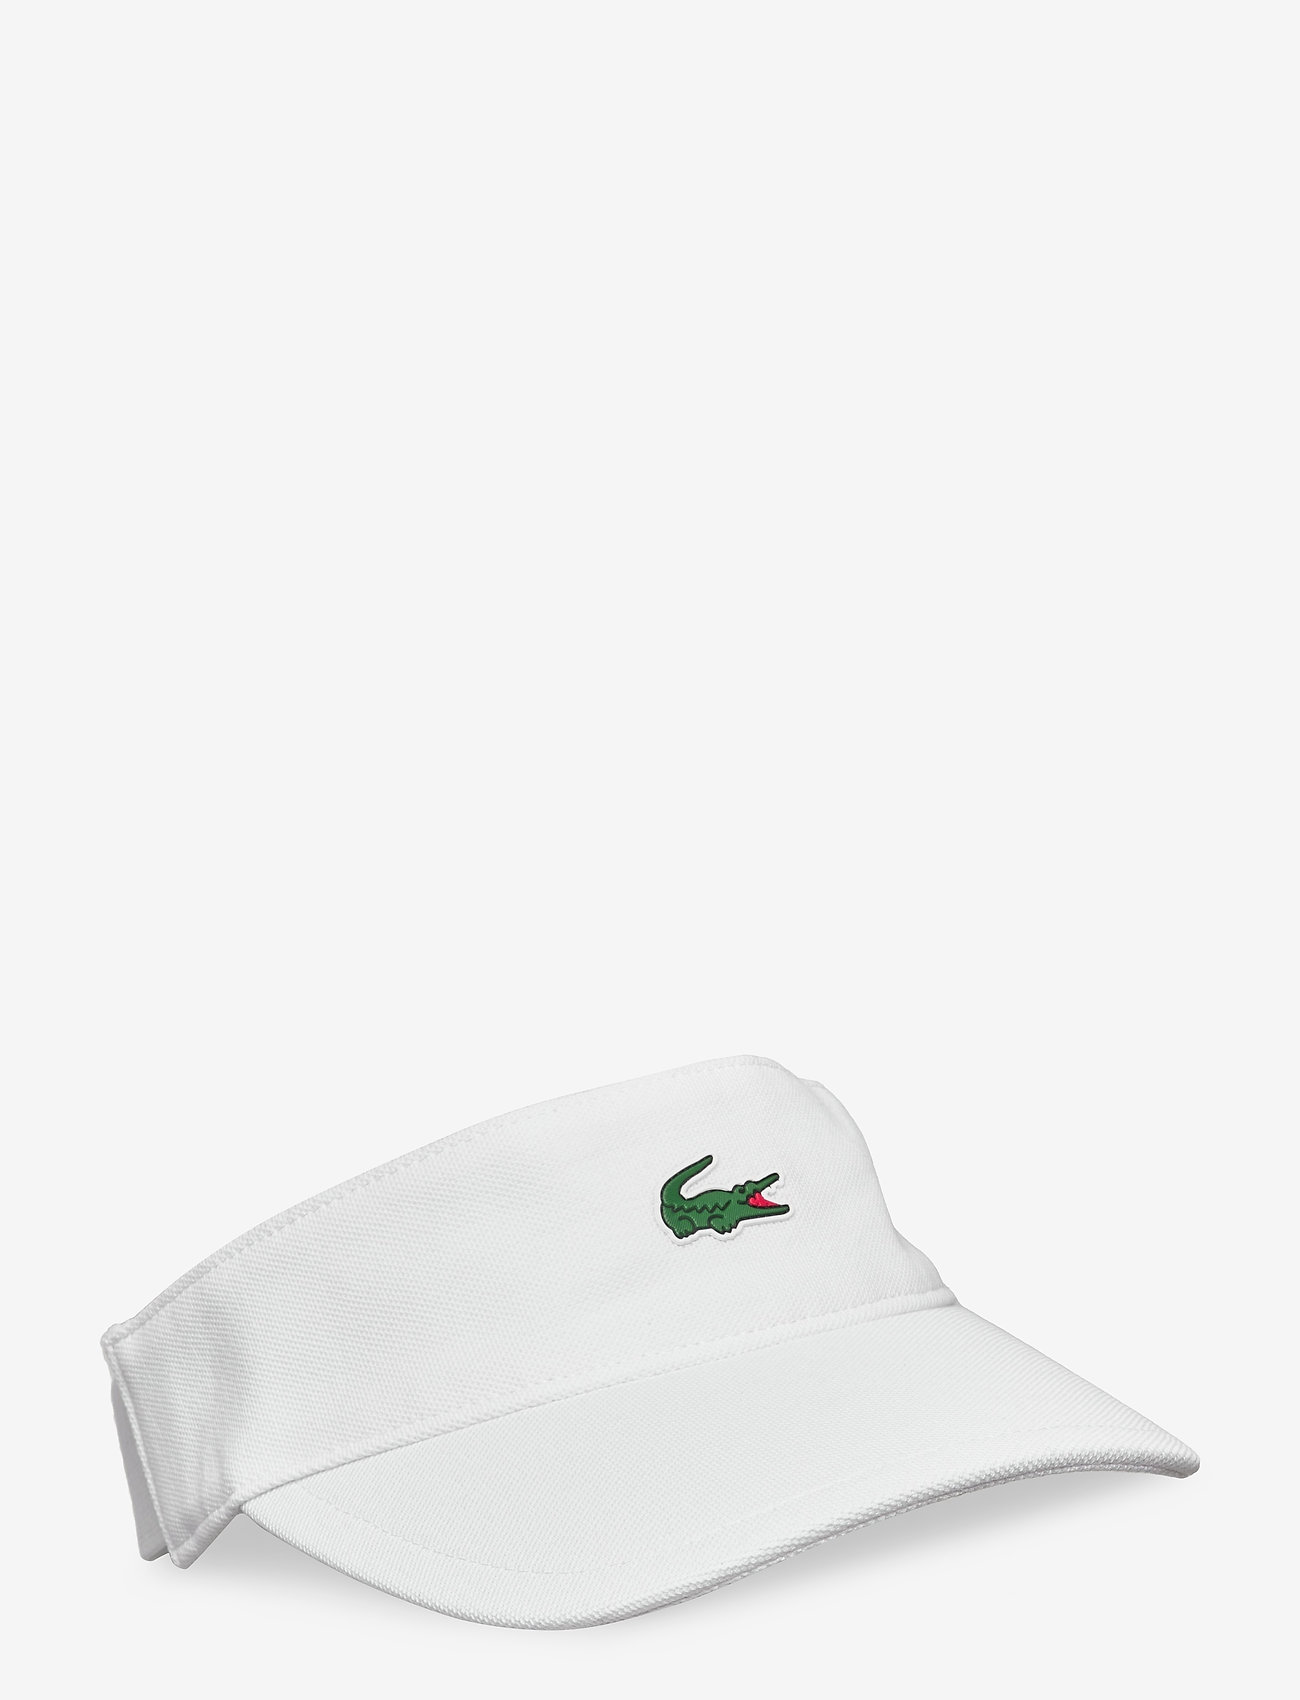 Lacoste - CAPS AND HATS - kepsar - white - 0